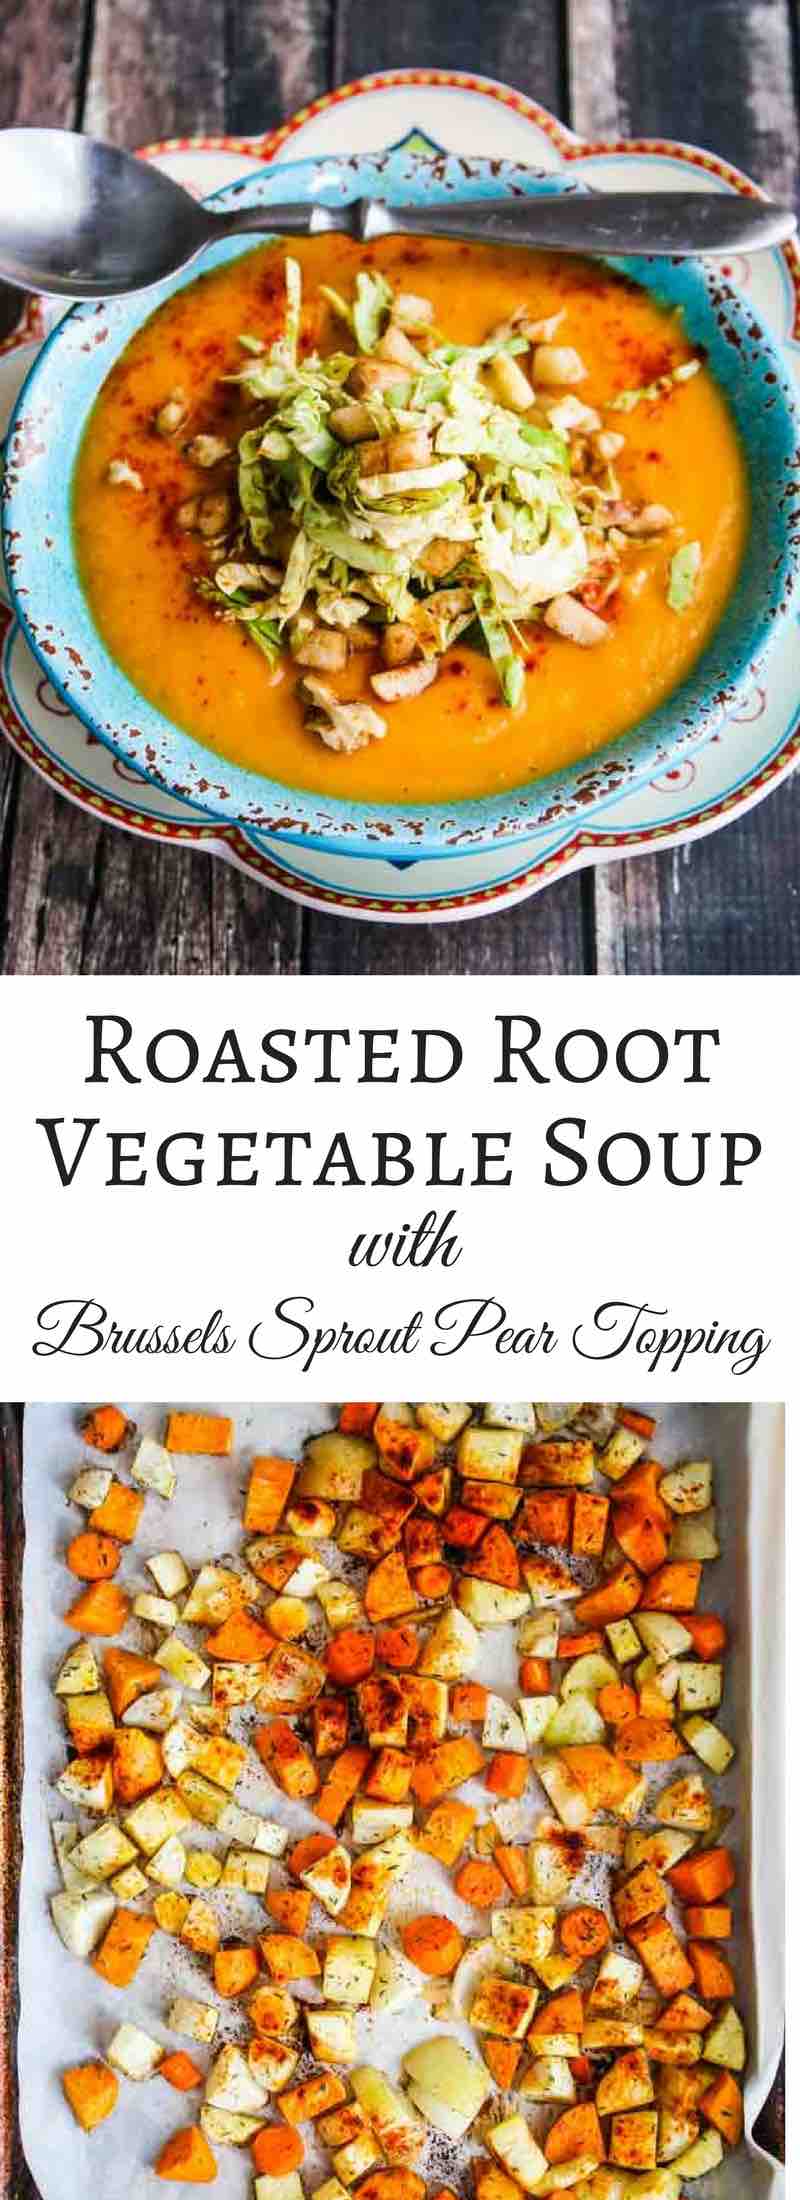 Roasted Root Vegetable Soup with Brussels Sprout Pear Topping - this velvety smooth soup topped with a cool crisp salad is healthy, delicious and vegan